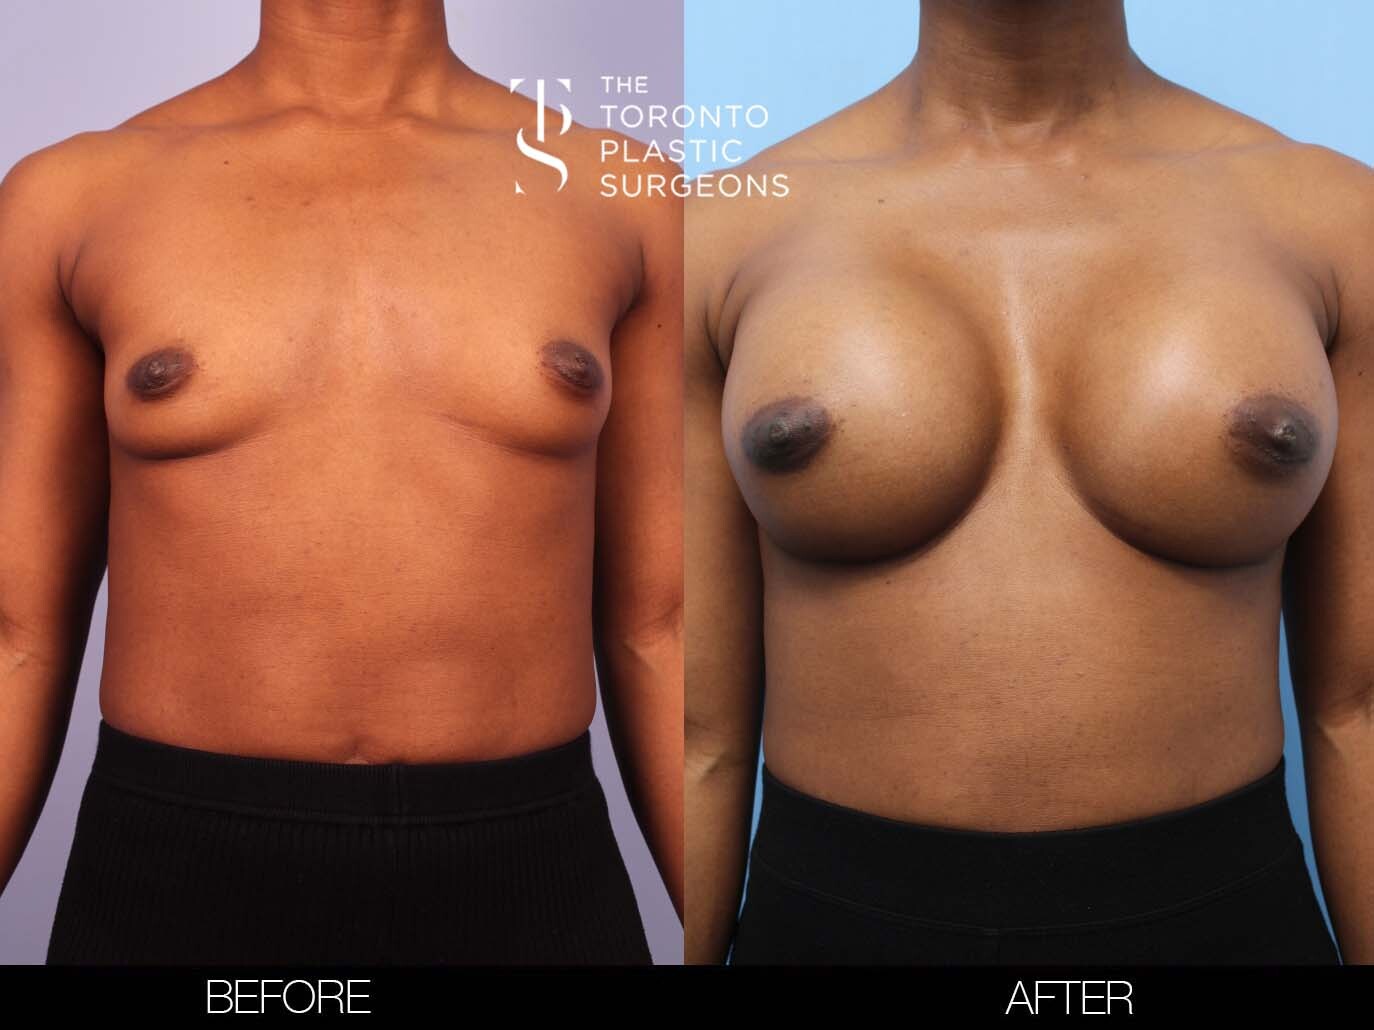 Before and after of breast implant surgery